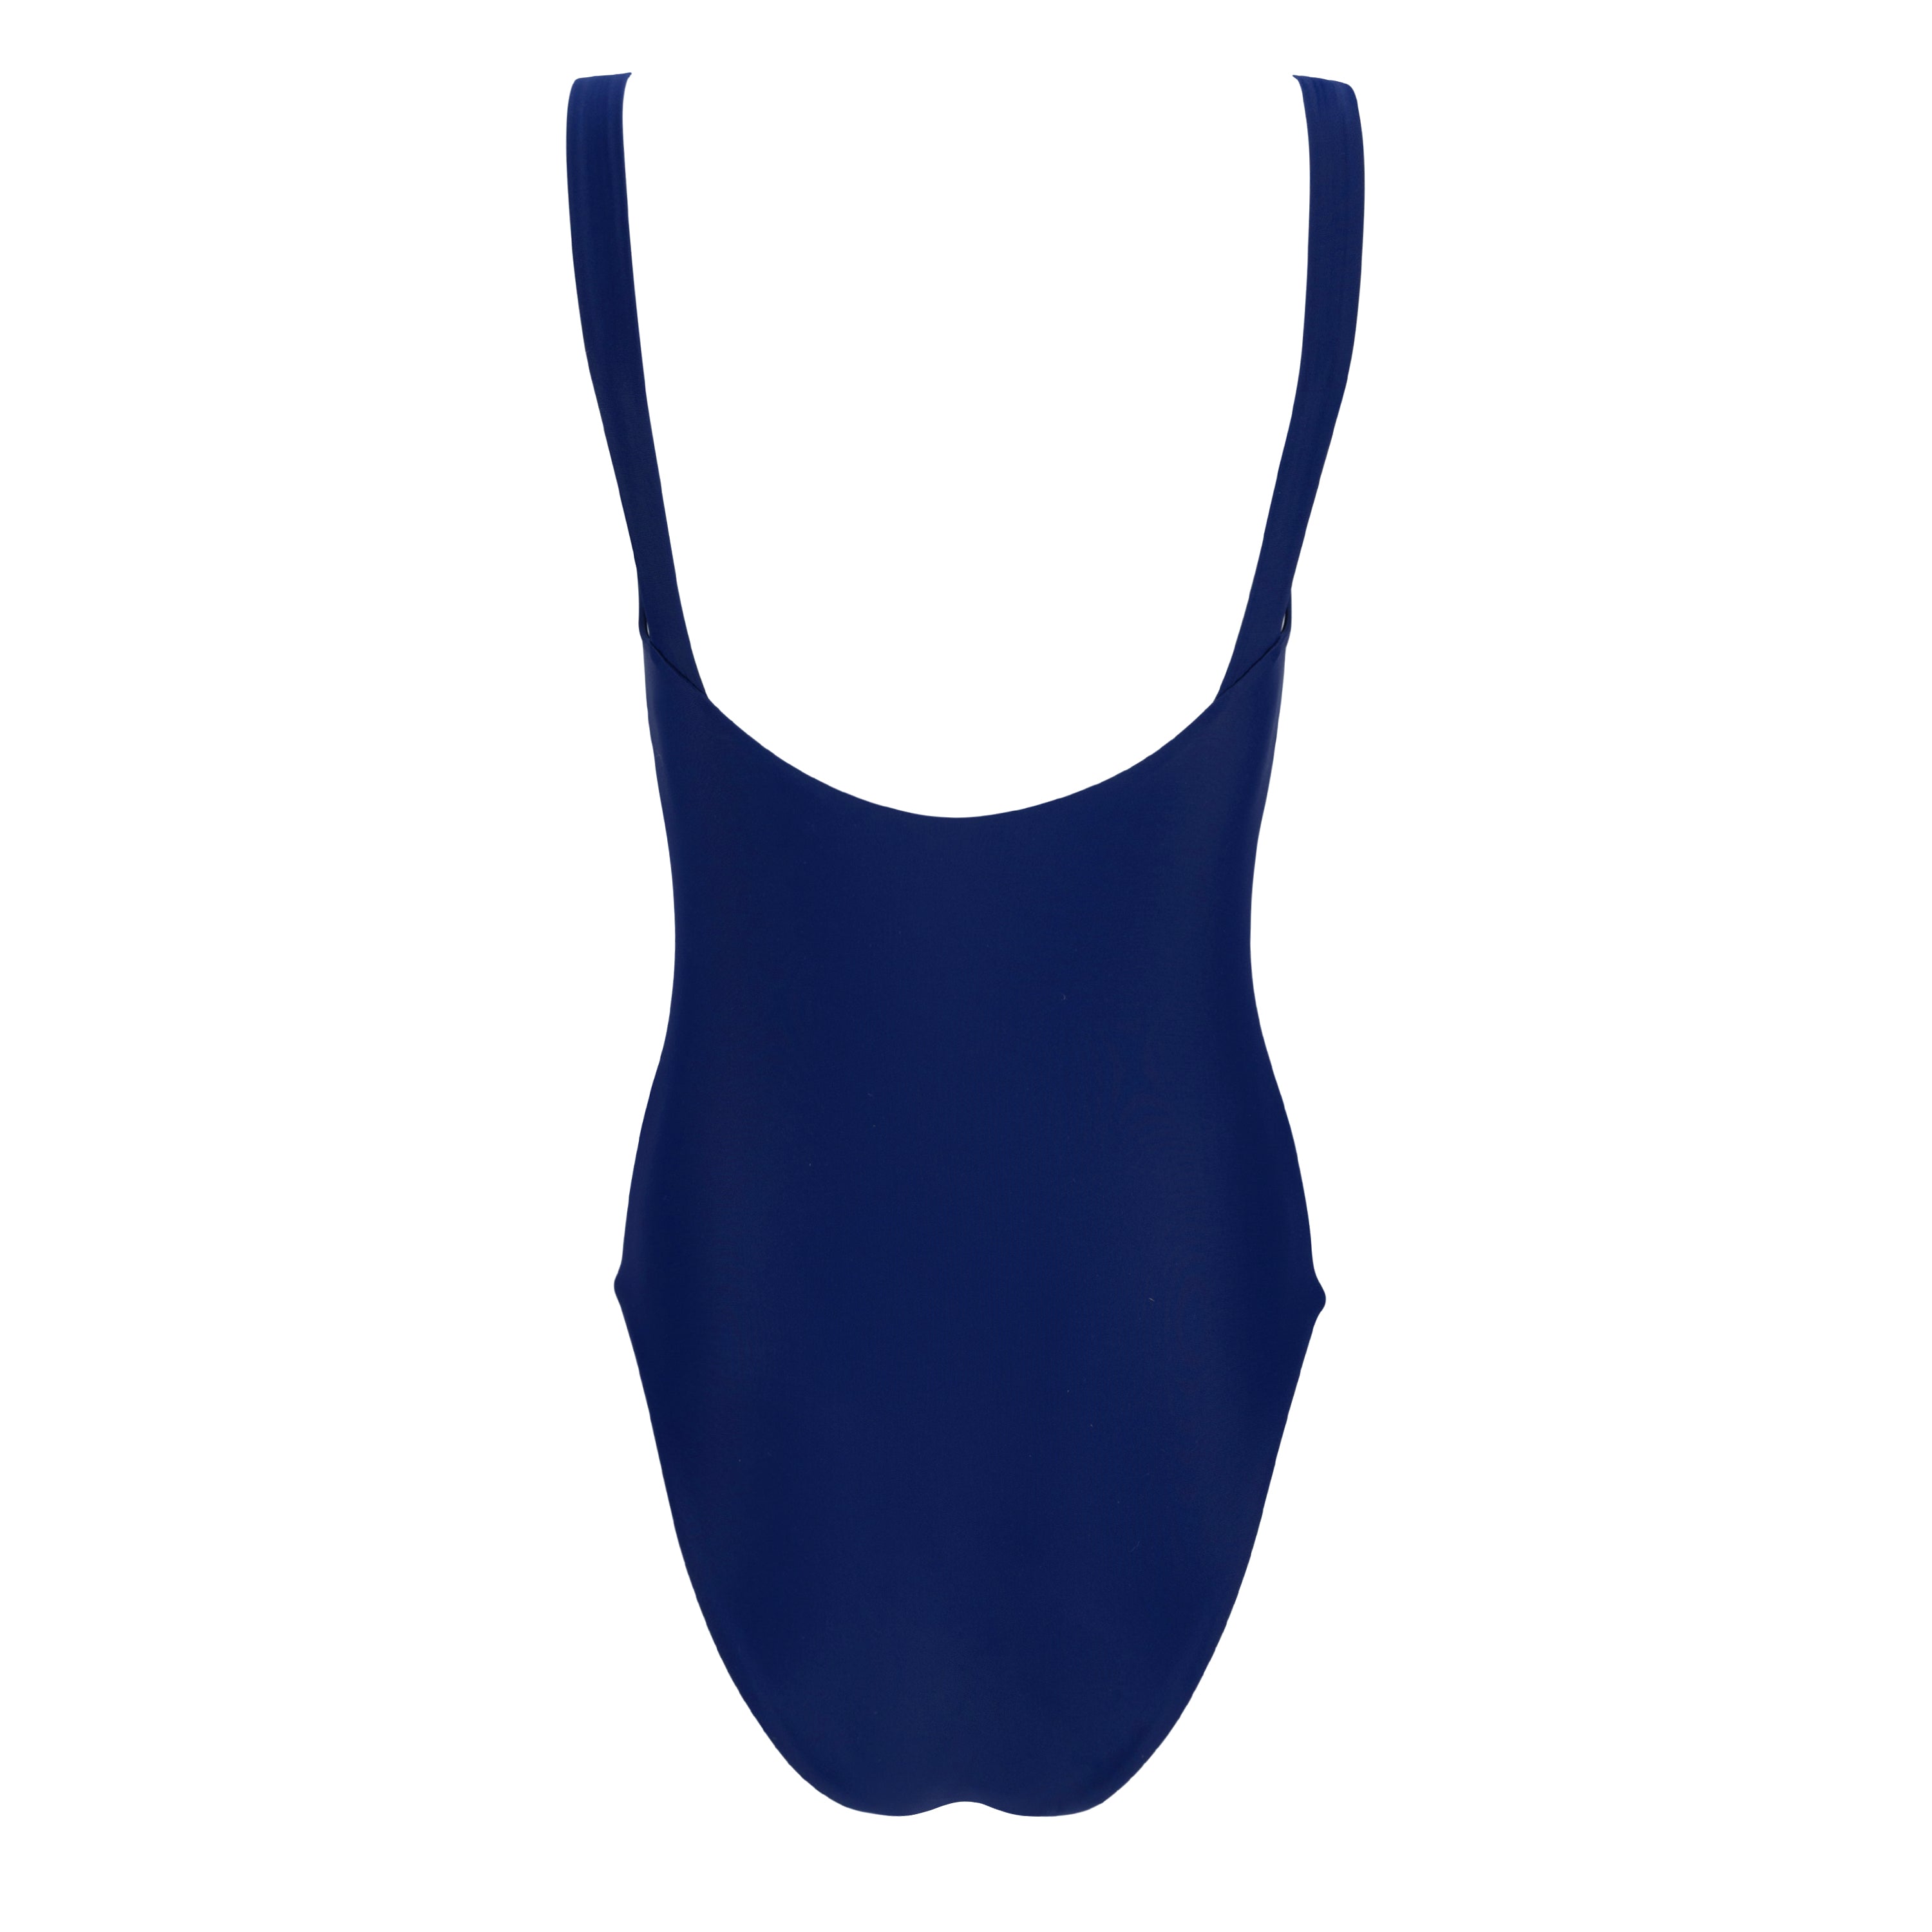 women's navy low back simple one piece